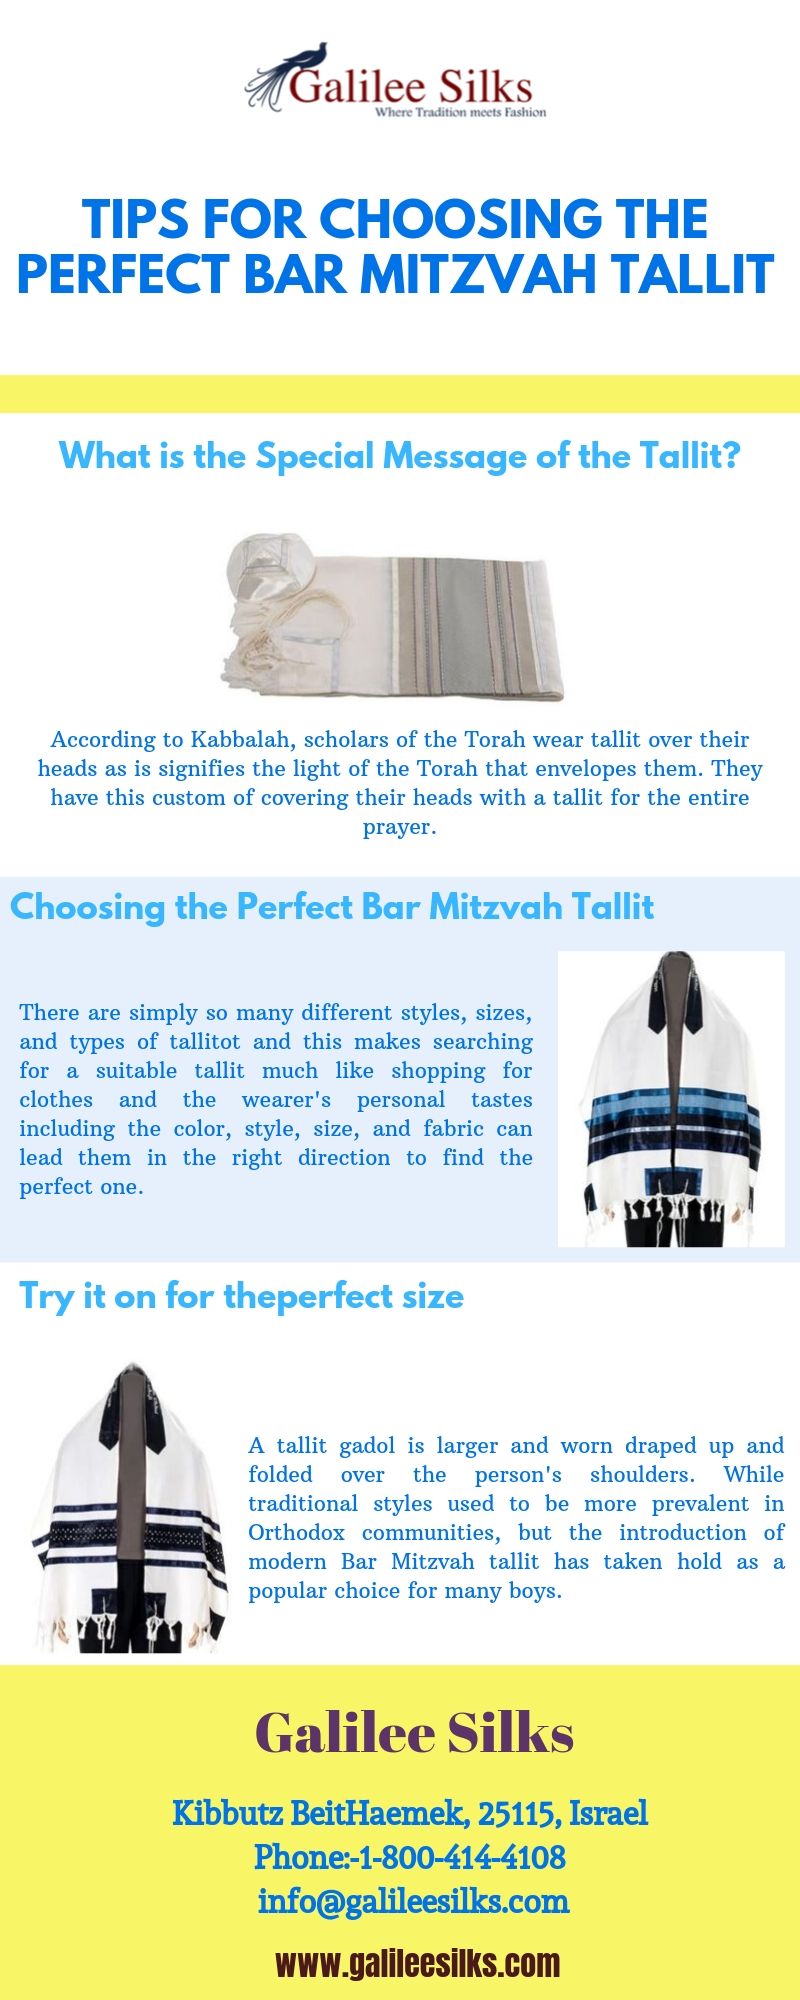 Tips for Choosing the Perfect Bar Mitzvah Tallit   At Bar Mitzvahs, many families choose to gift their child with a tallit, which they can wear for the first time as they lead a congregation in prayer and learning. For more details, visit this link: https://bit.ly/2m8q4xY
 by amramrafi